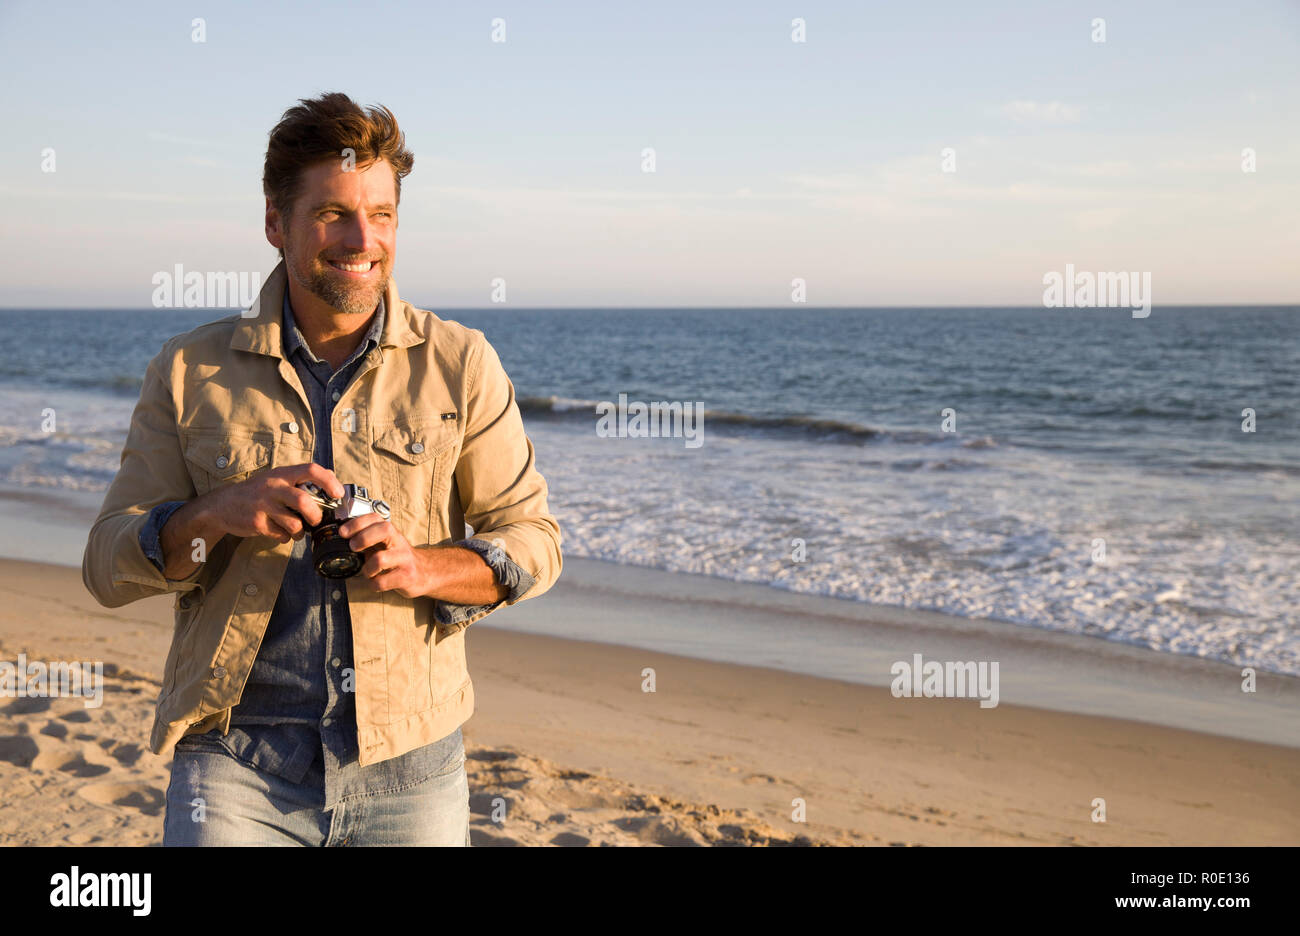 Half-Length Portrait of Smiling Mid-Adult Man with Camera at Beach Stock Photo